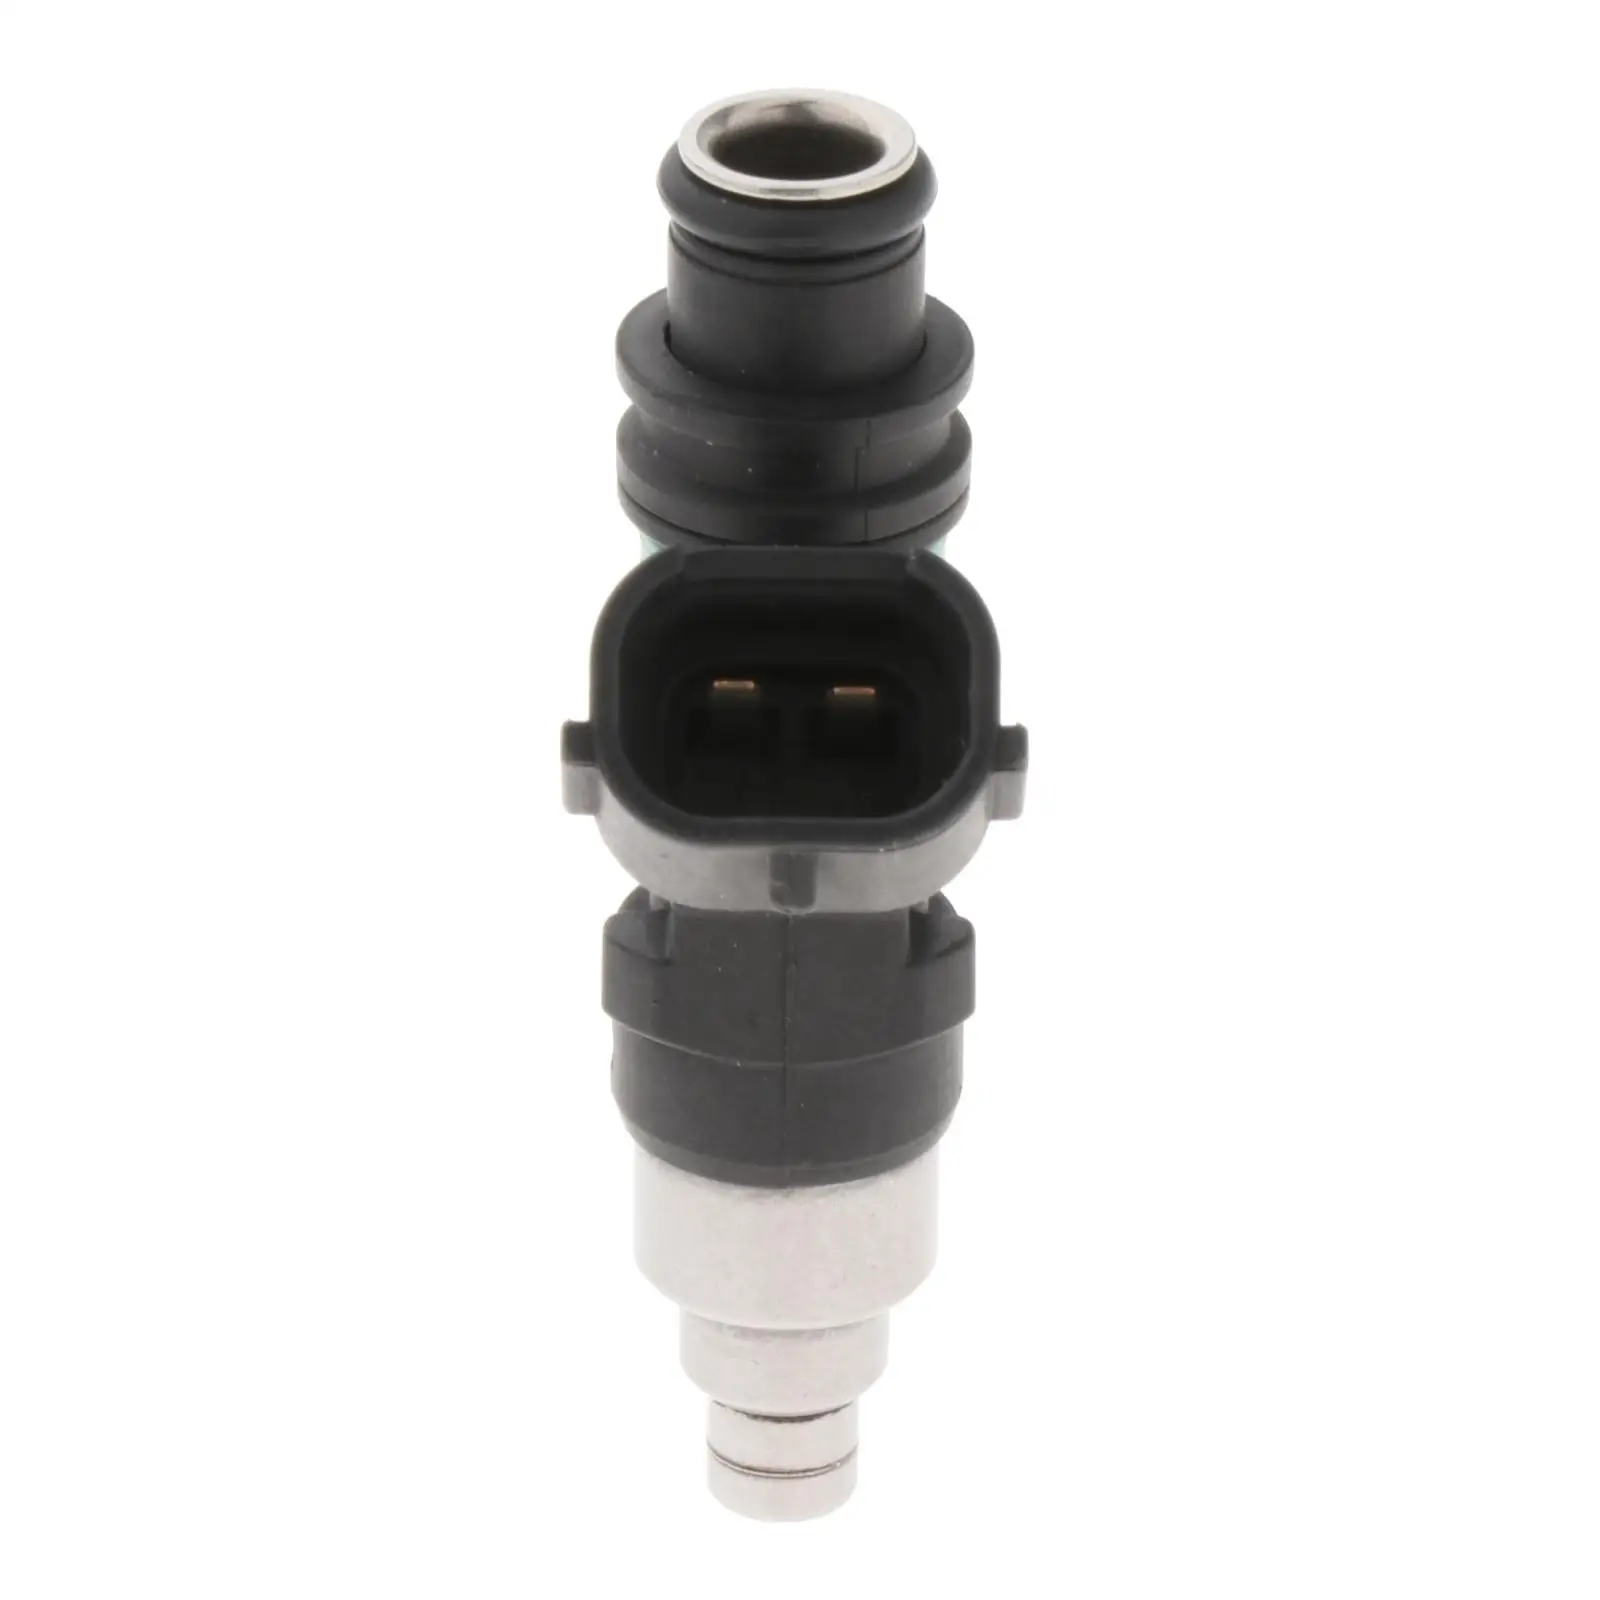 Fuel Injector Spare Parts Fits for Suzuki Outboard DF 90 2015 Boat Parts